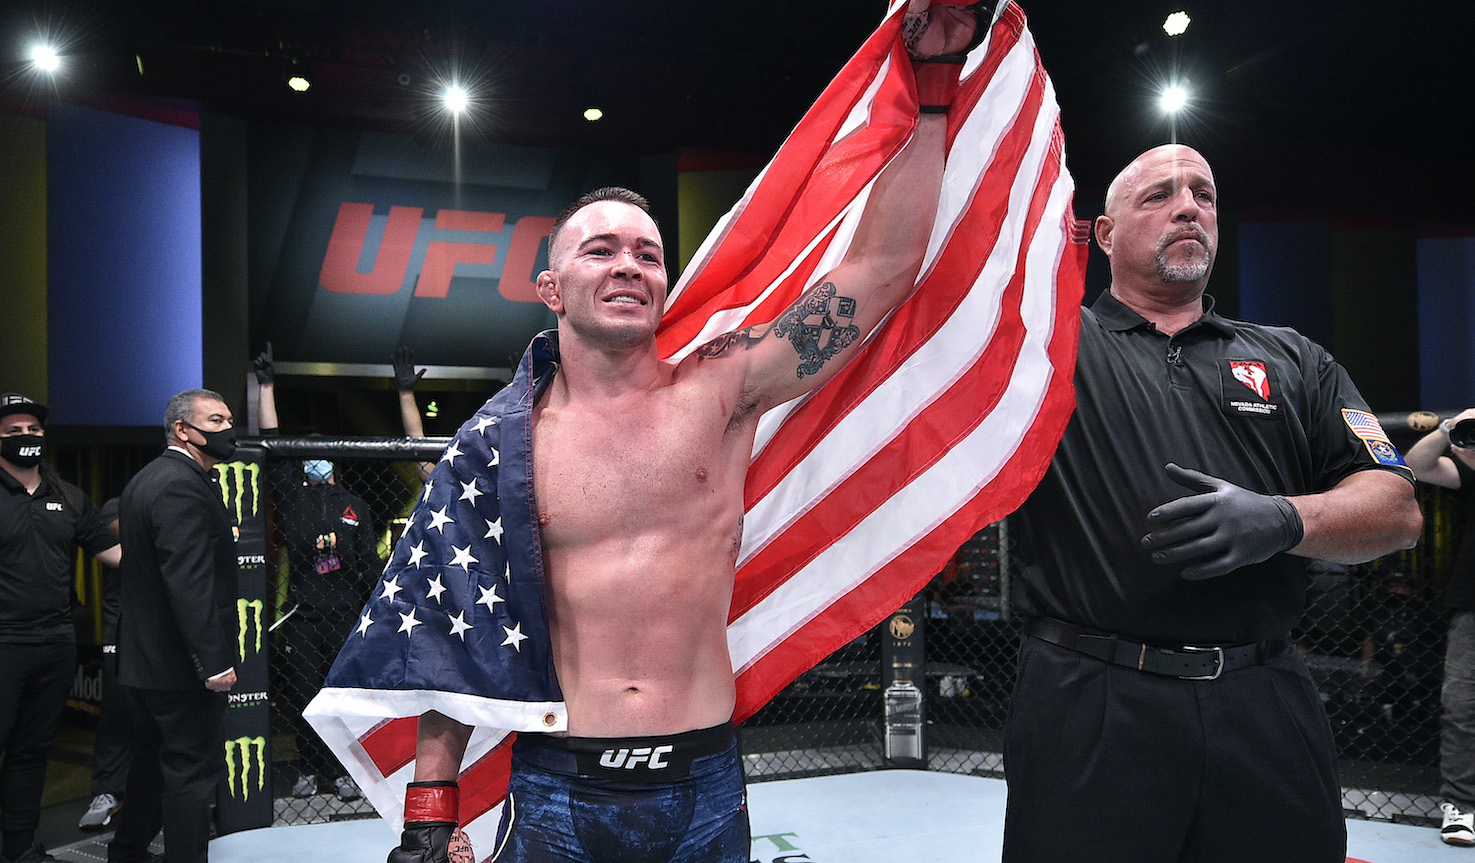 Colby Covington gets his hand raised in an empty arena.